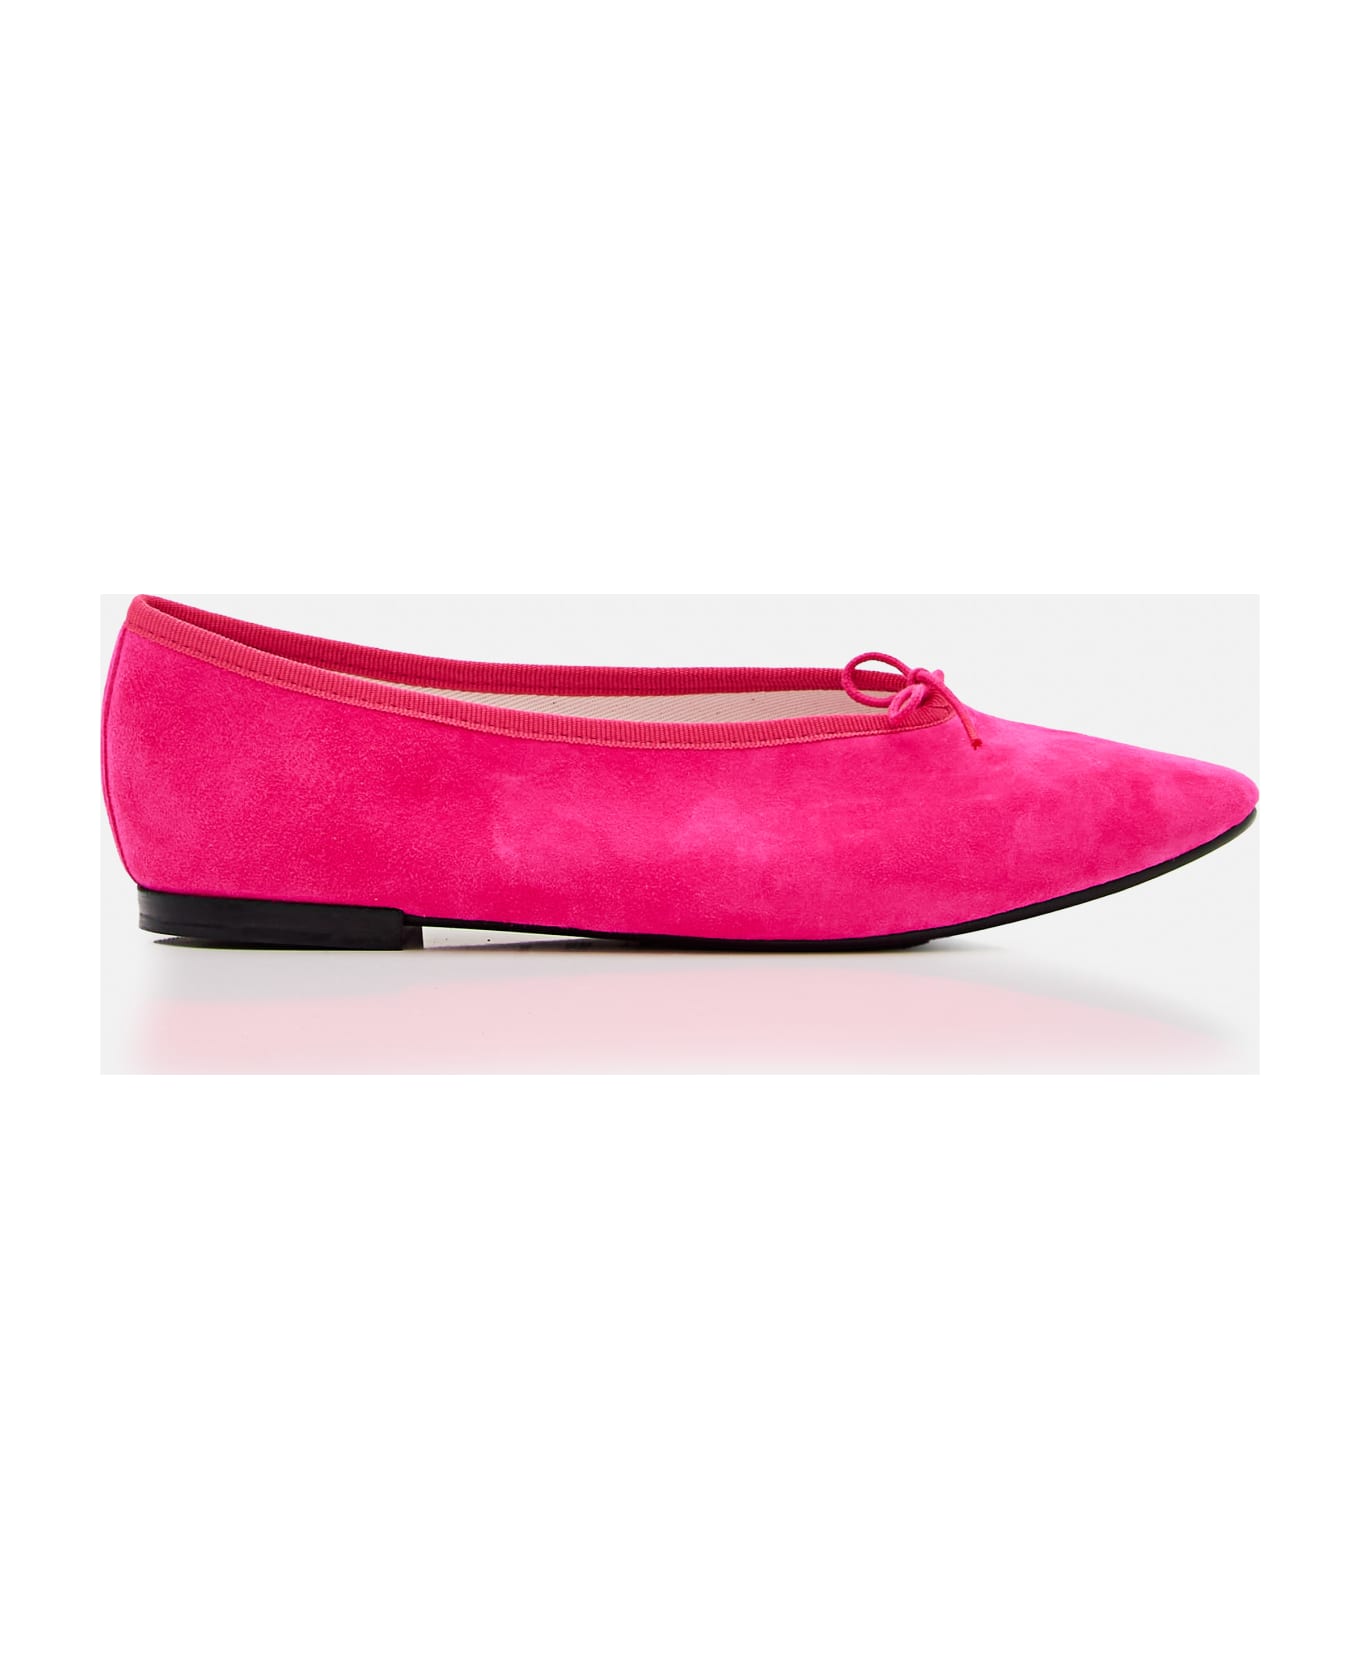 Repetto Lilouh Leather Ballerinas - Pink